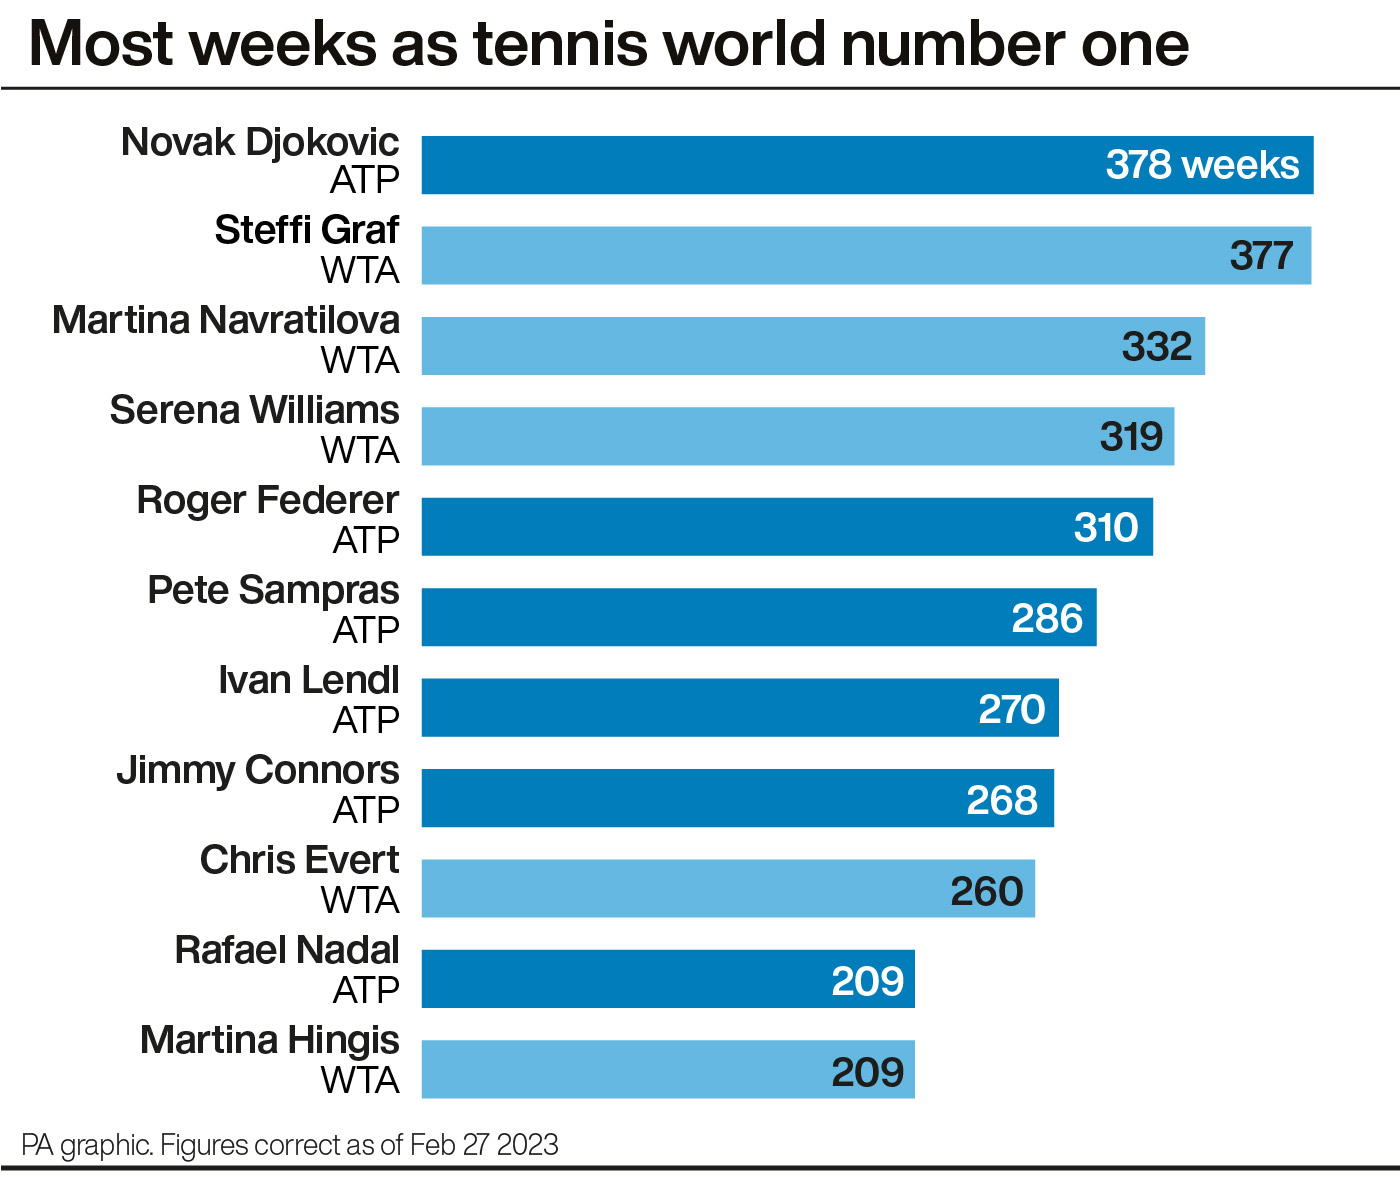 Most weeks as tennis world number one